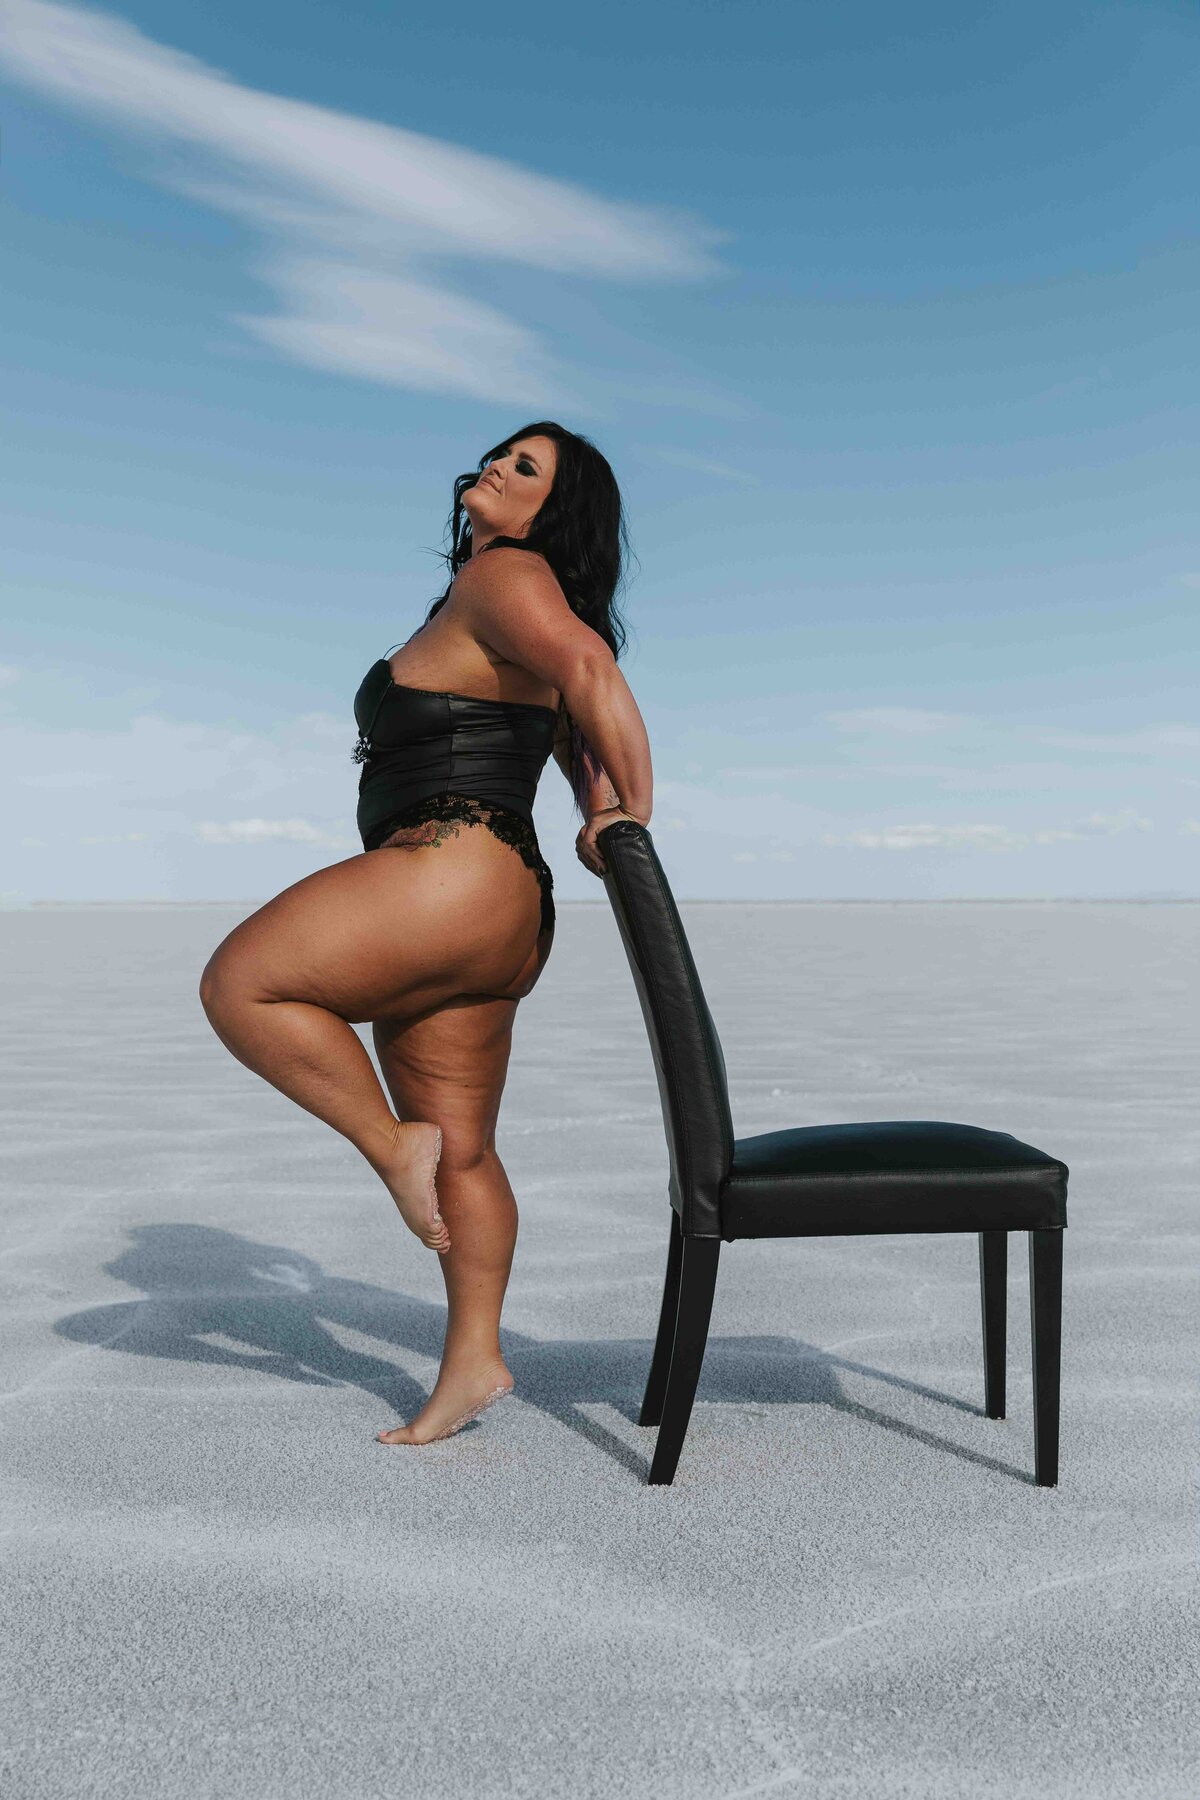 Woman posing with a chair on the salt flats